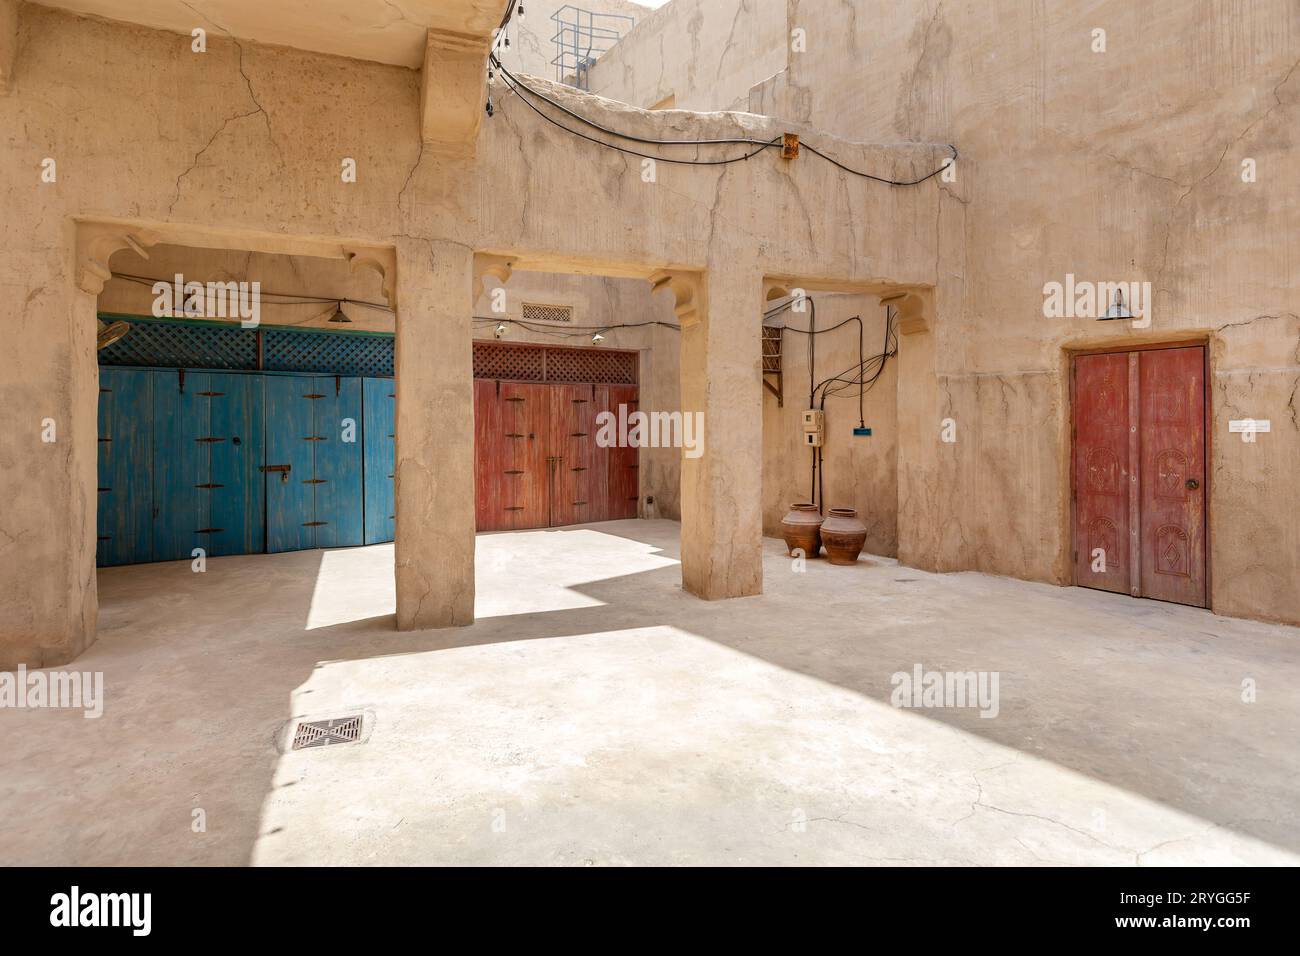 Arabic style doors at the traditional market in old Dubai Stock Photo